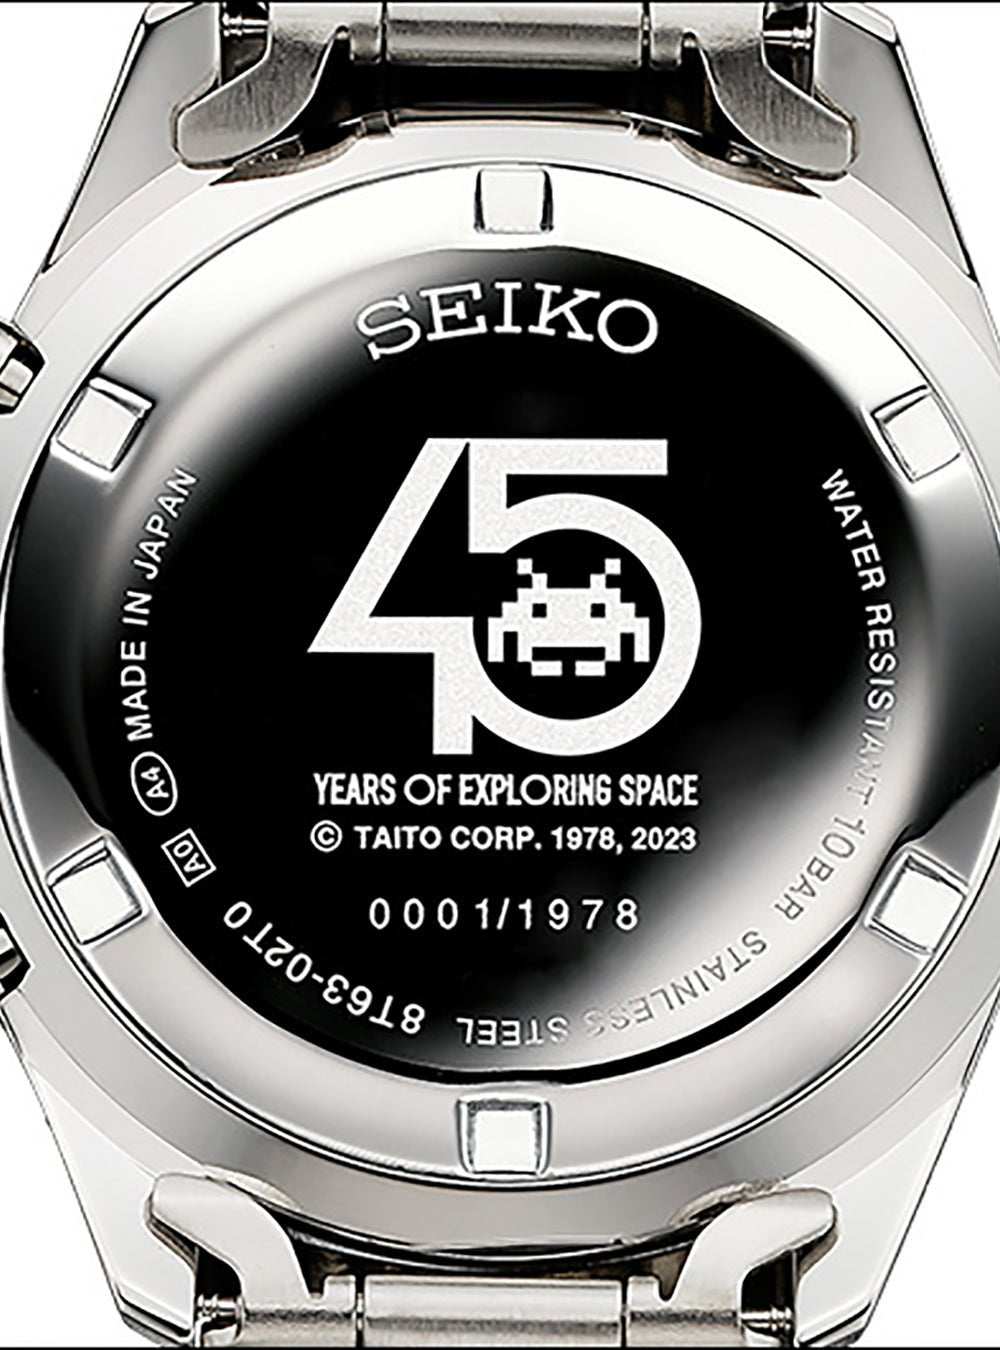 SEIKO x SPACE INVADERS 45 YEARS OF EXPLORING SPACE LIMITED EDITION MADE IN JAPANWRISTWATCHjapan-select